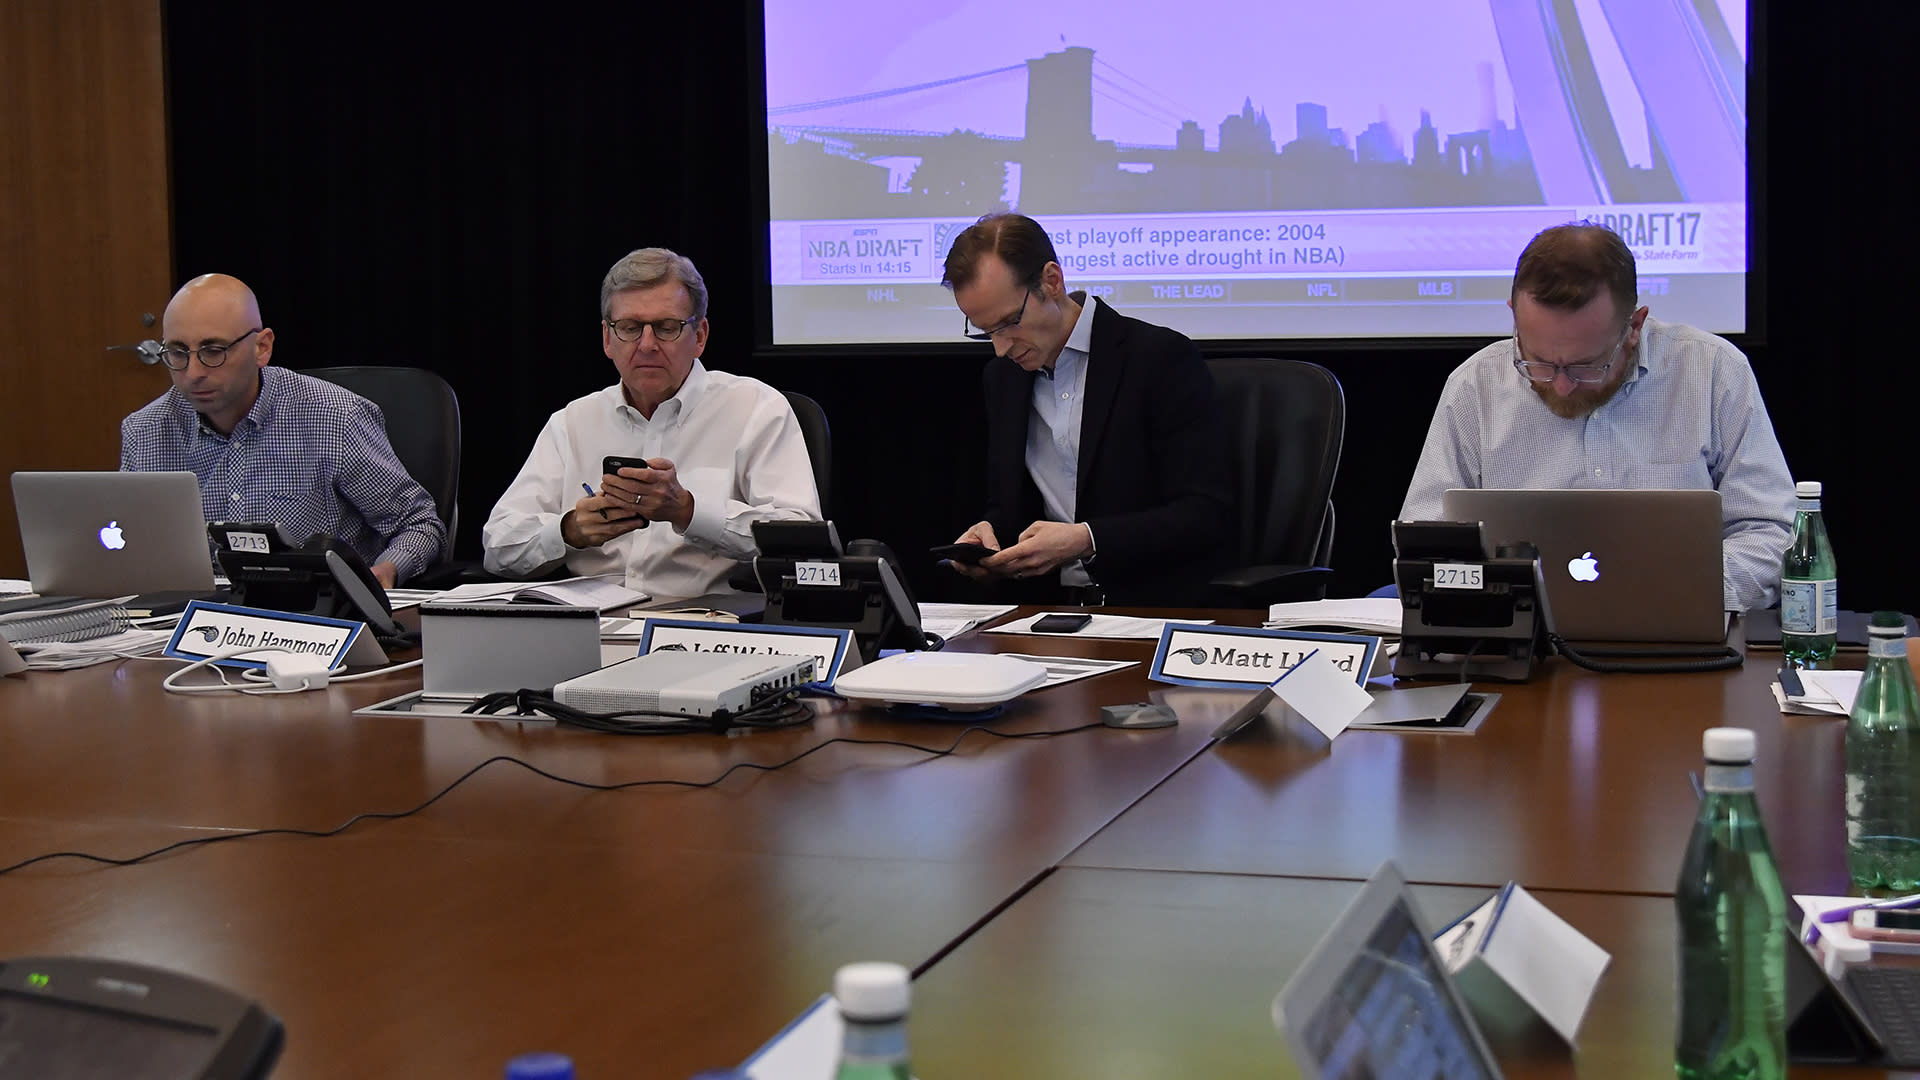 What is a NBA Draft war room like in the last 24 hours?